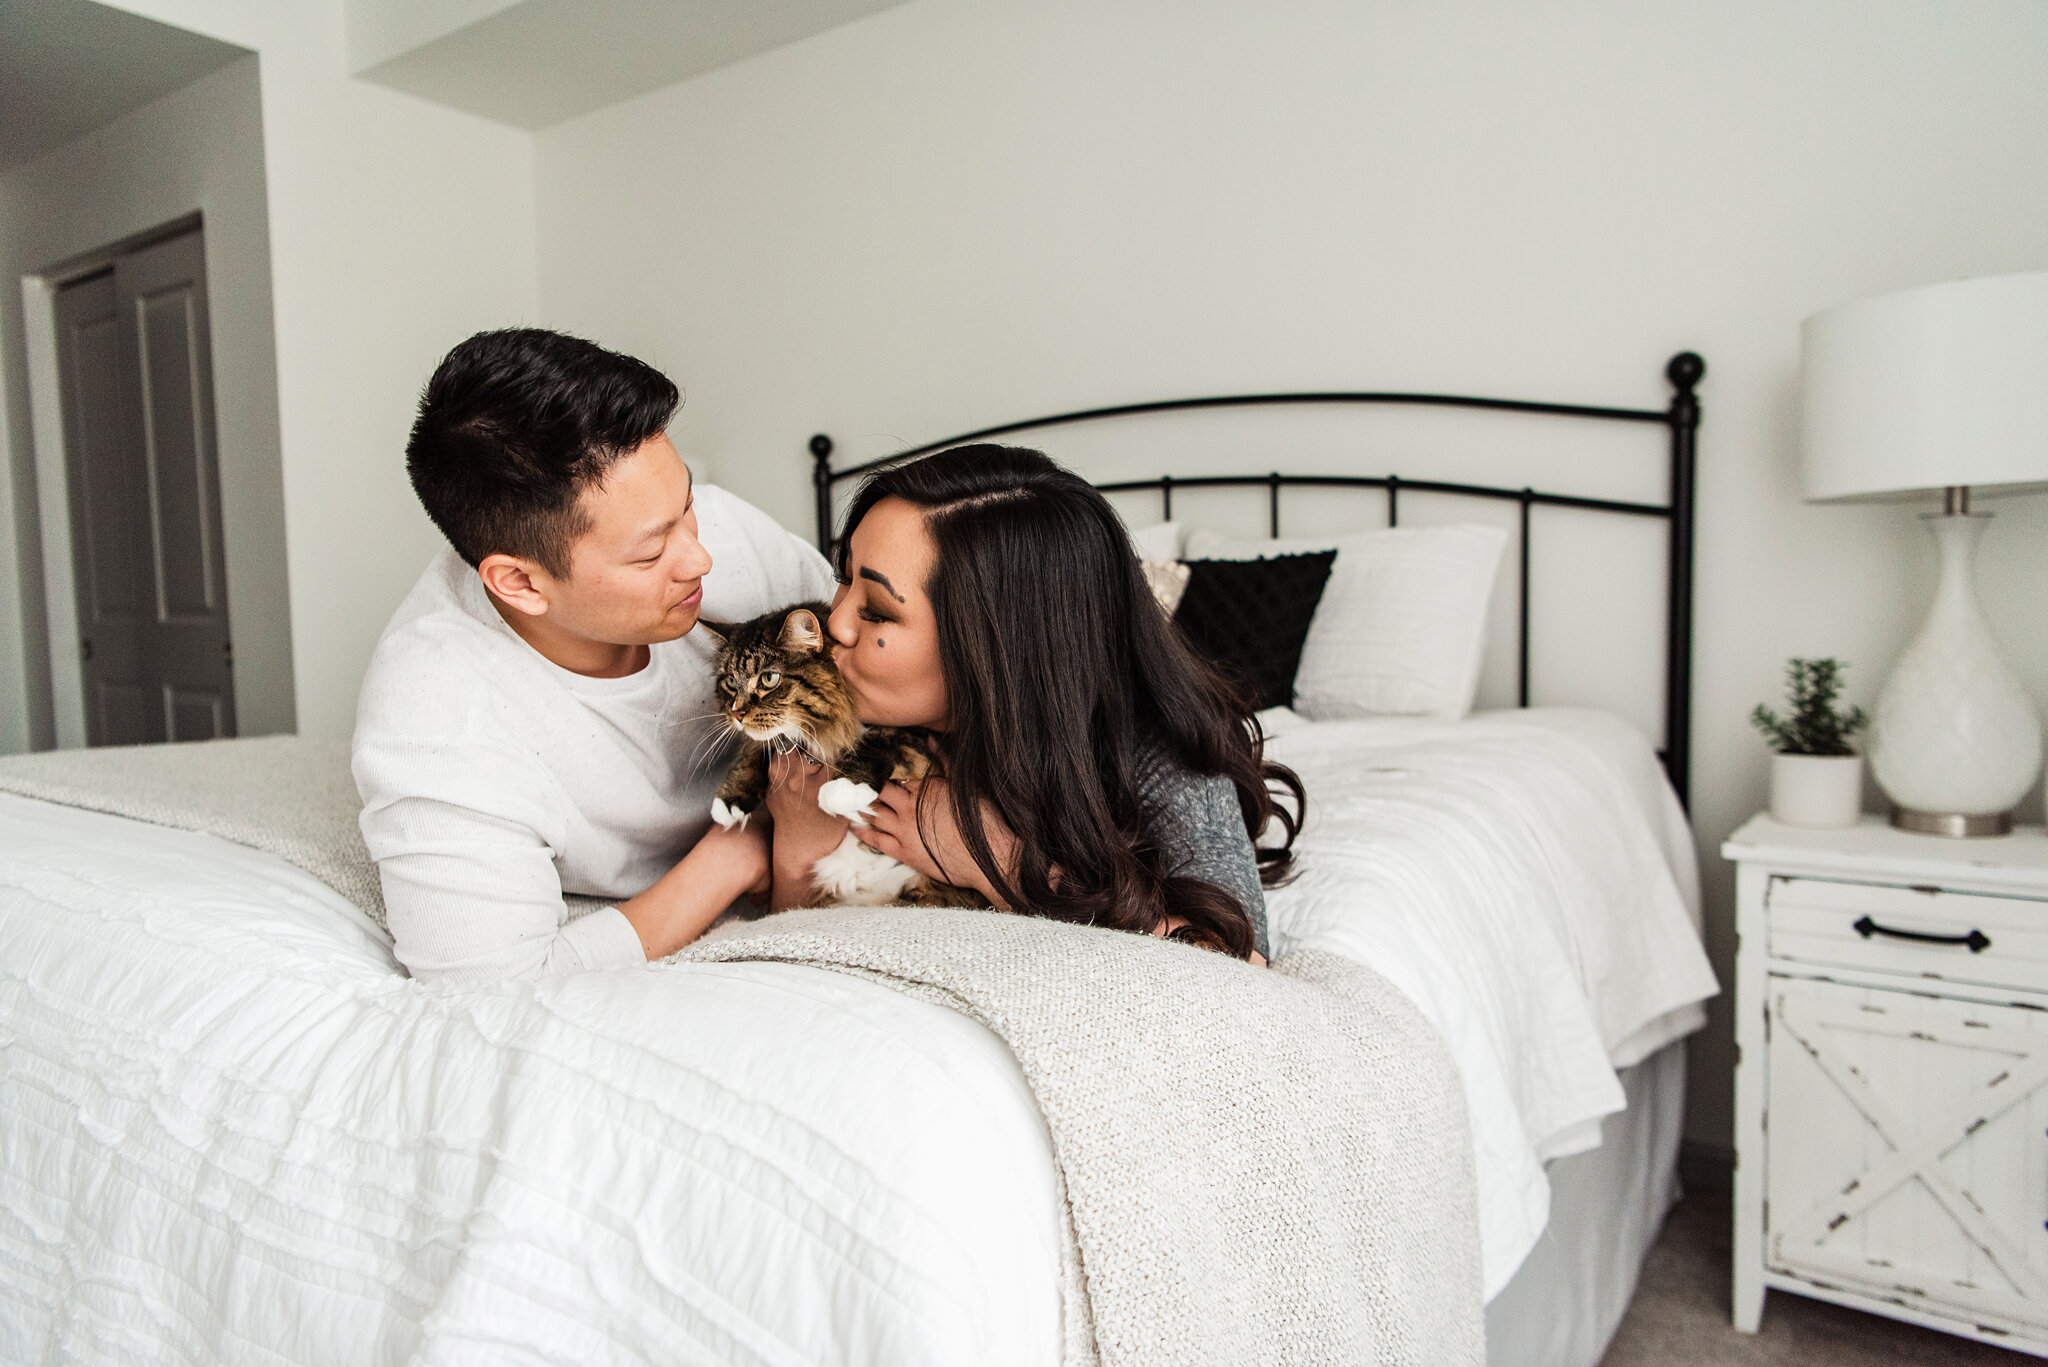 In_Home_Rochester_Couples_Session_JILL_STUDIO_Rochester_NY_Photographer_4382.jpg